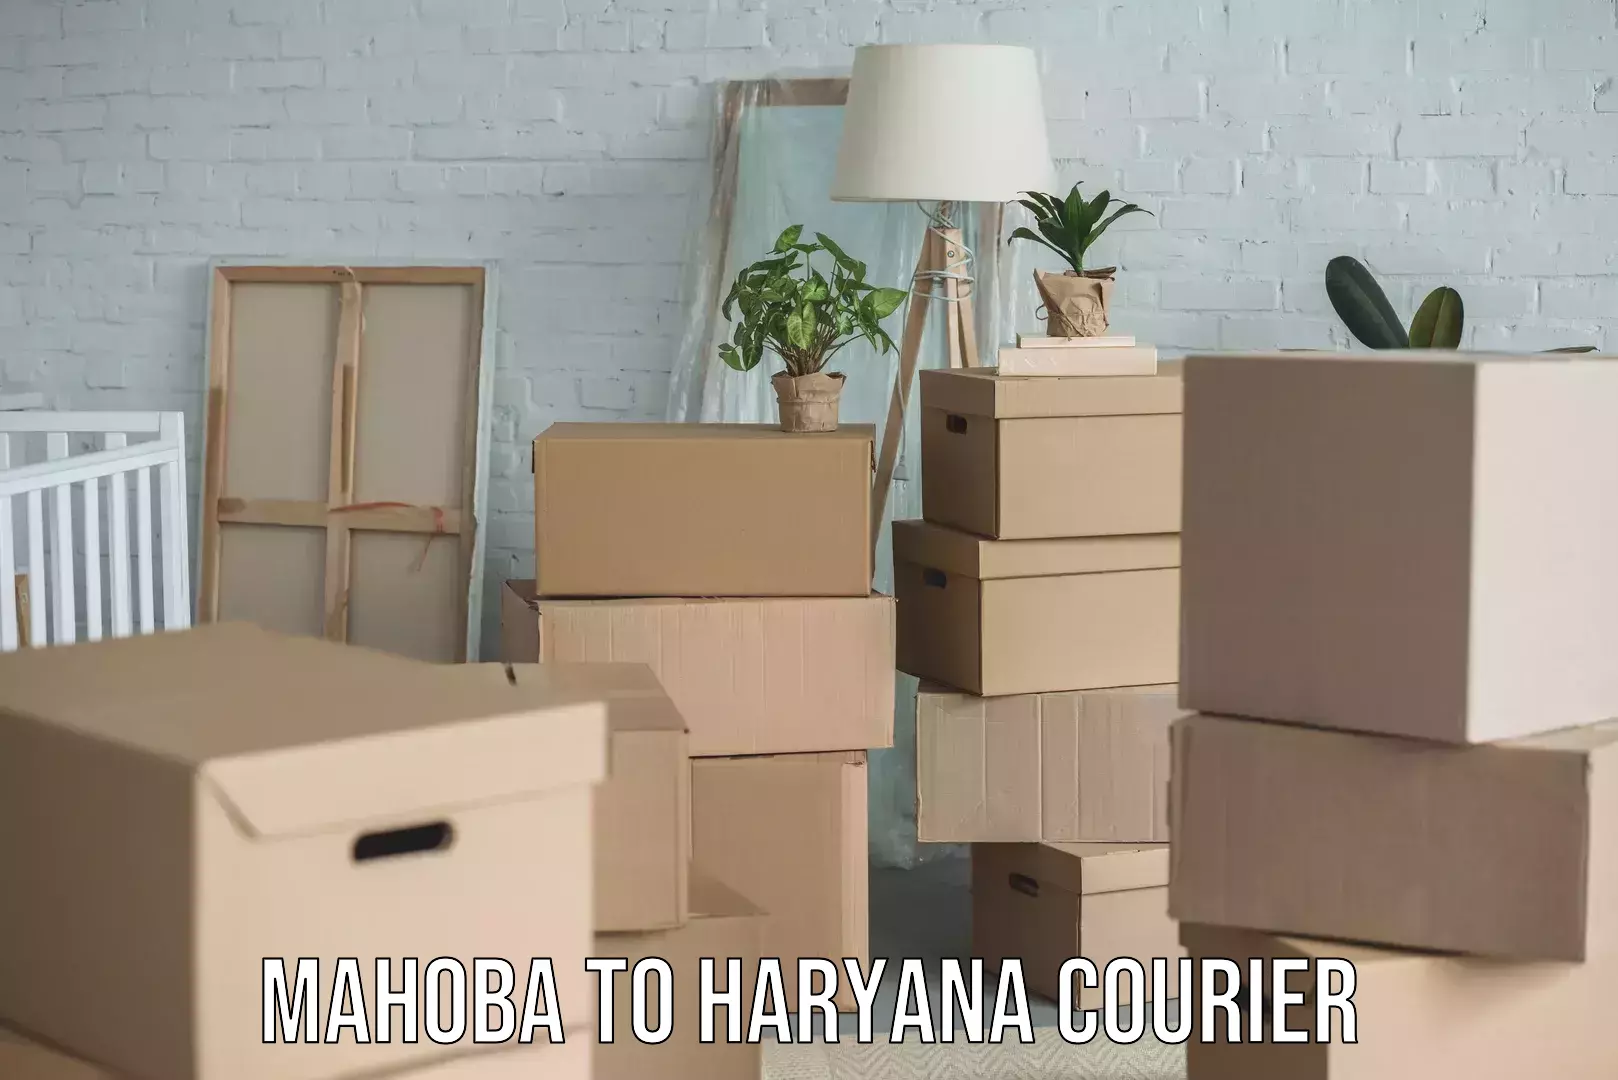 Furniture transport specialists Mahoba to Haryana